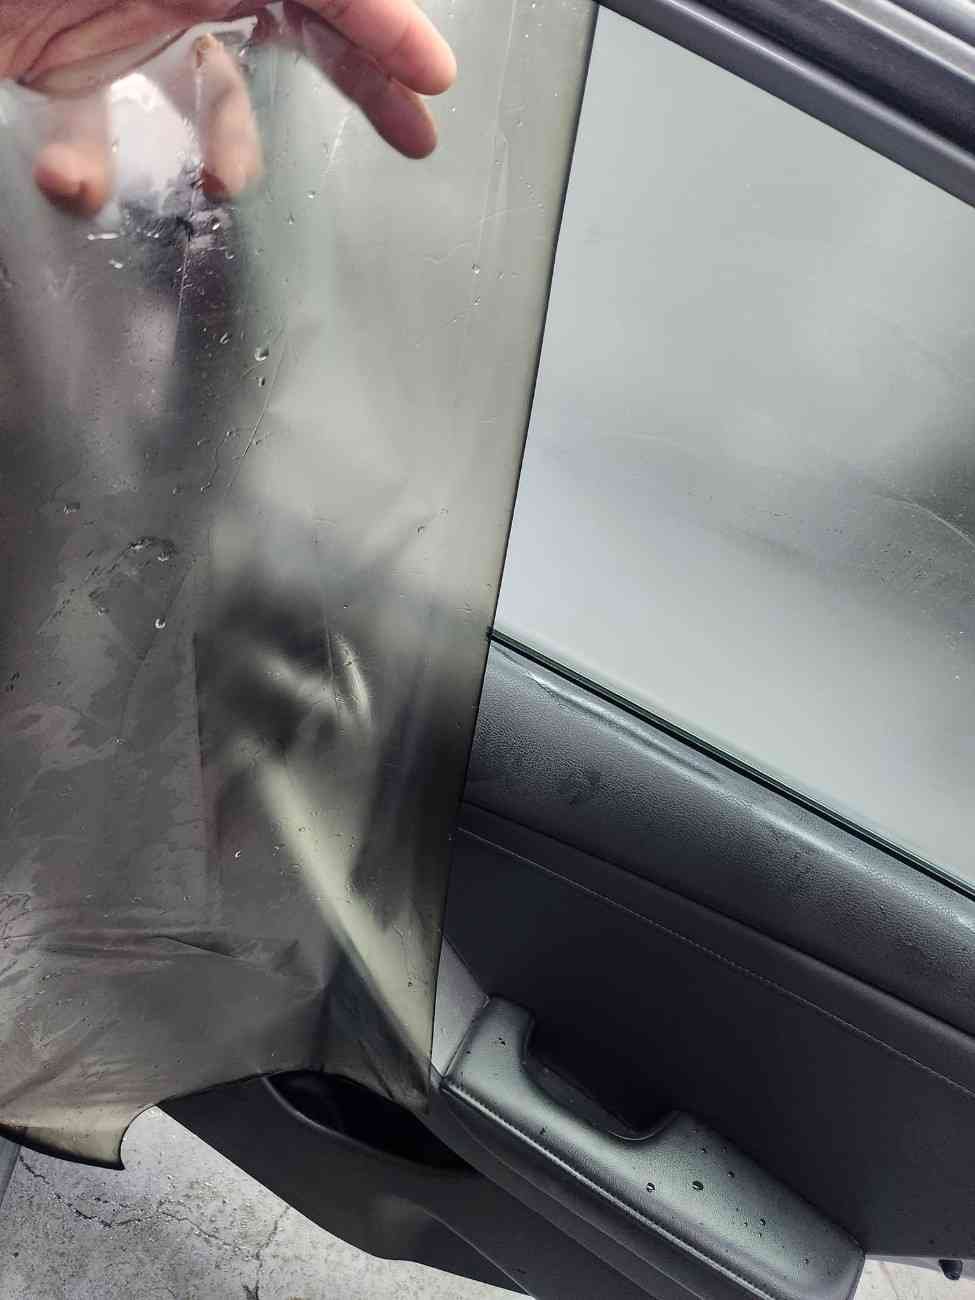 Expert mobile window tinting service in Mission Hills, CA with Mobile San Fernando Car Glass